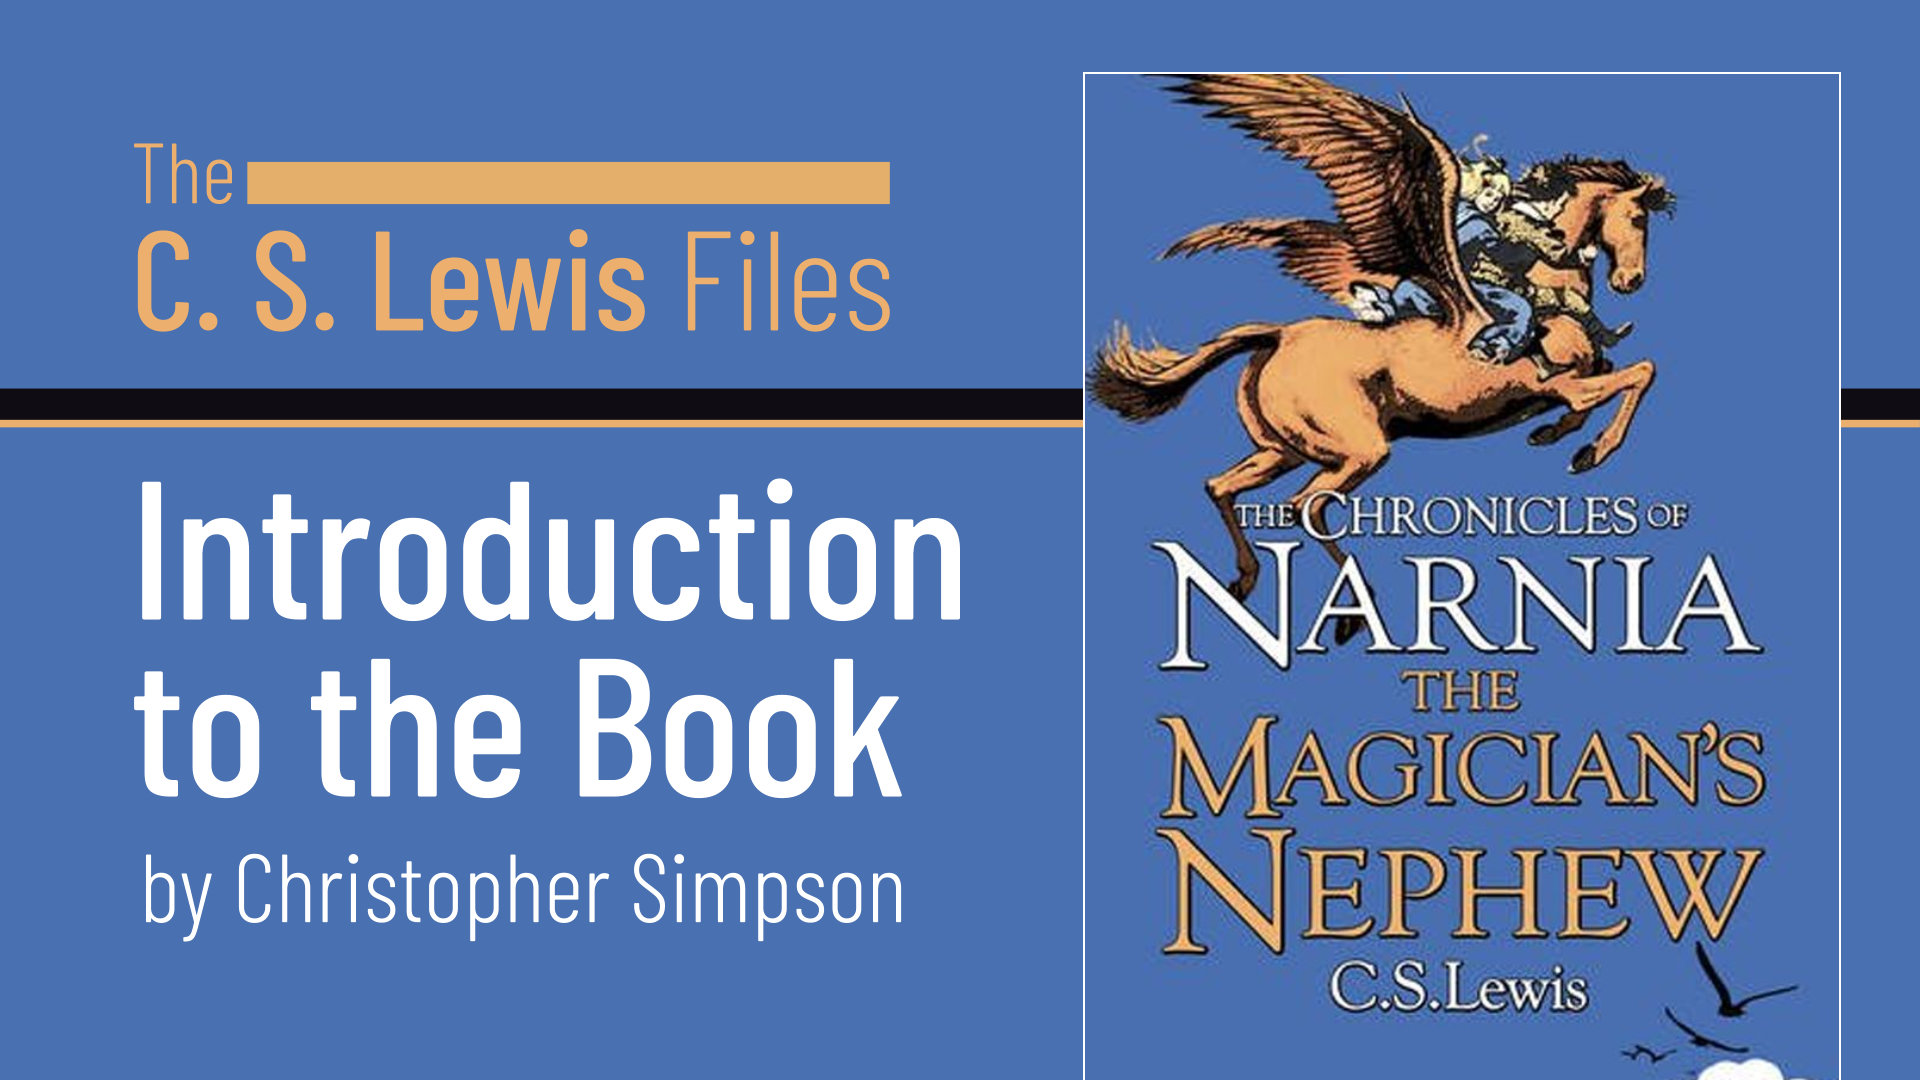 The C.S. Lewis Files - The Magician's Nephew | Introduction to the Book